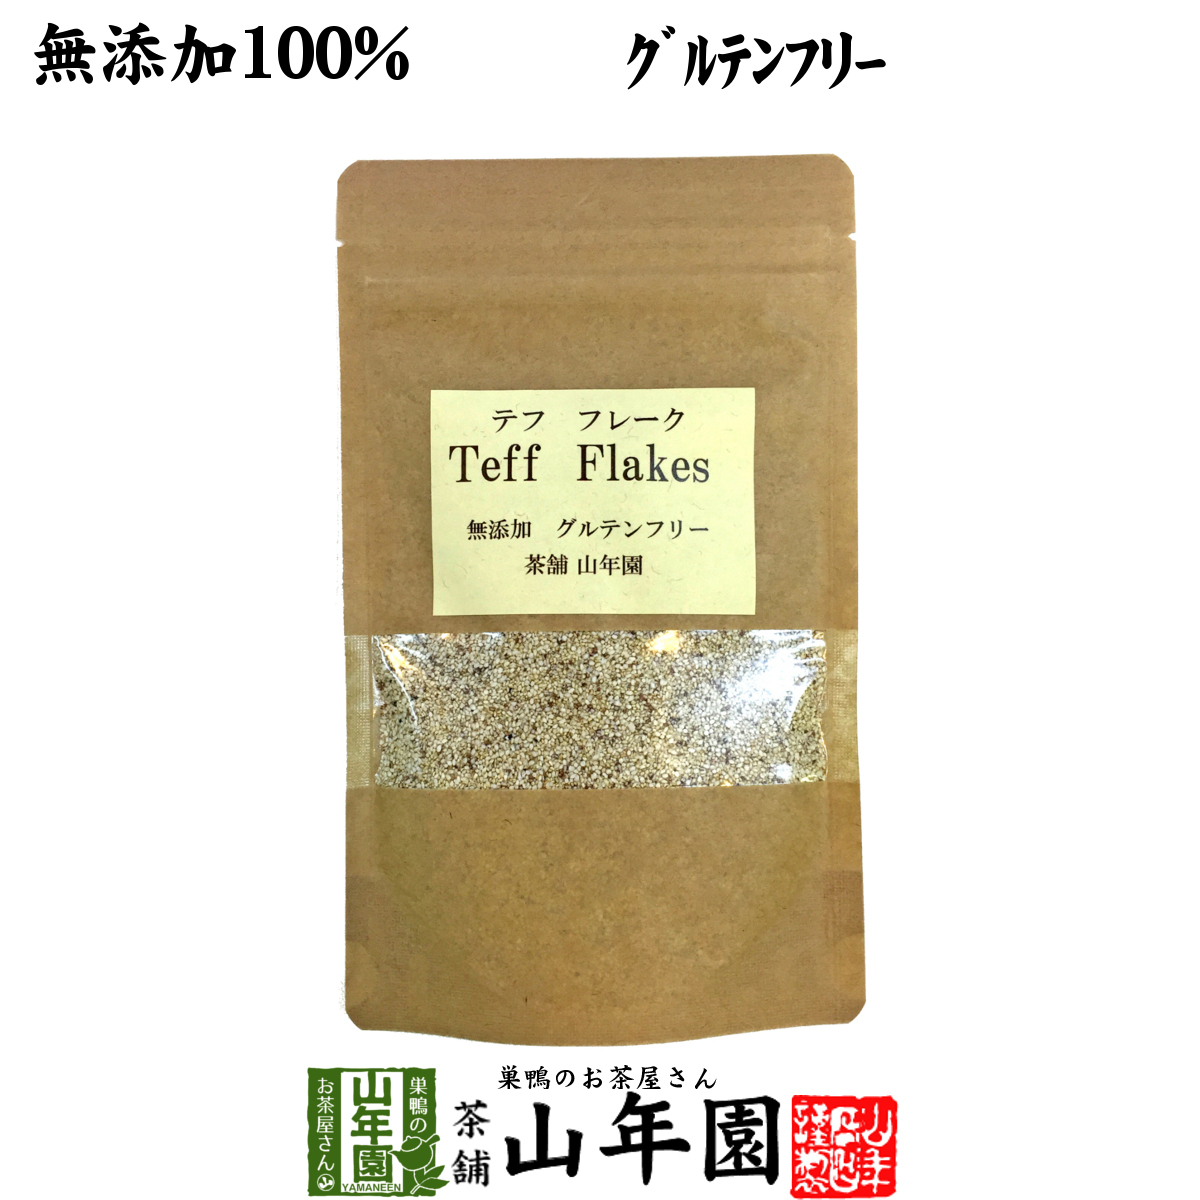  health food no addition 100%tef flakes 60g that way meal .... white tef free shipping 